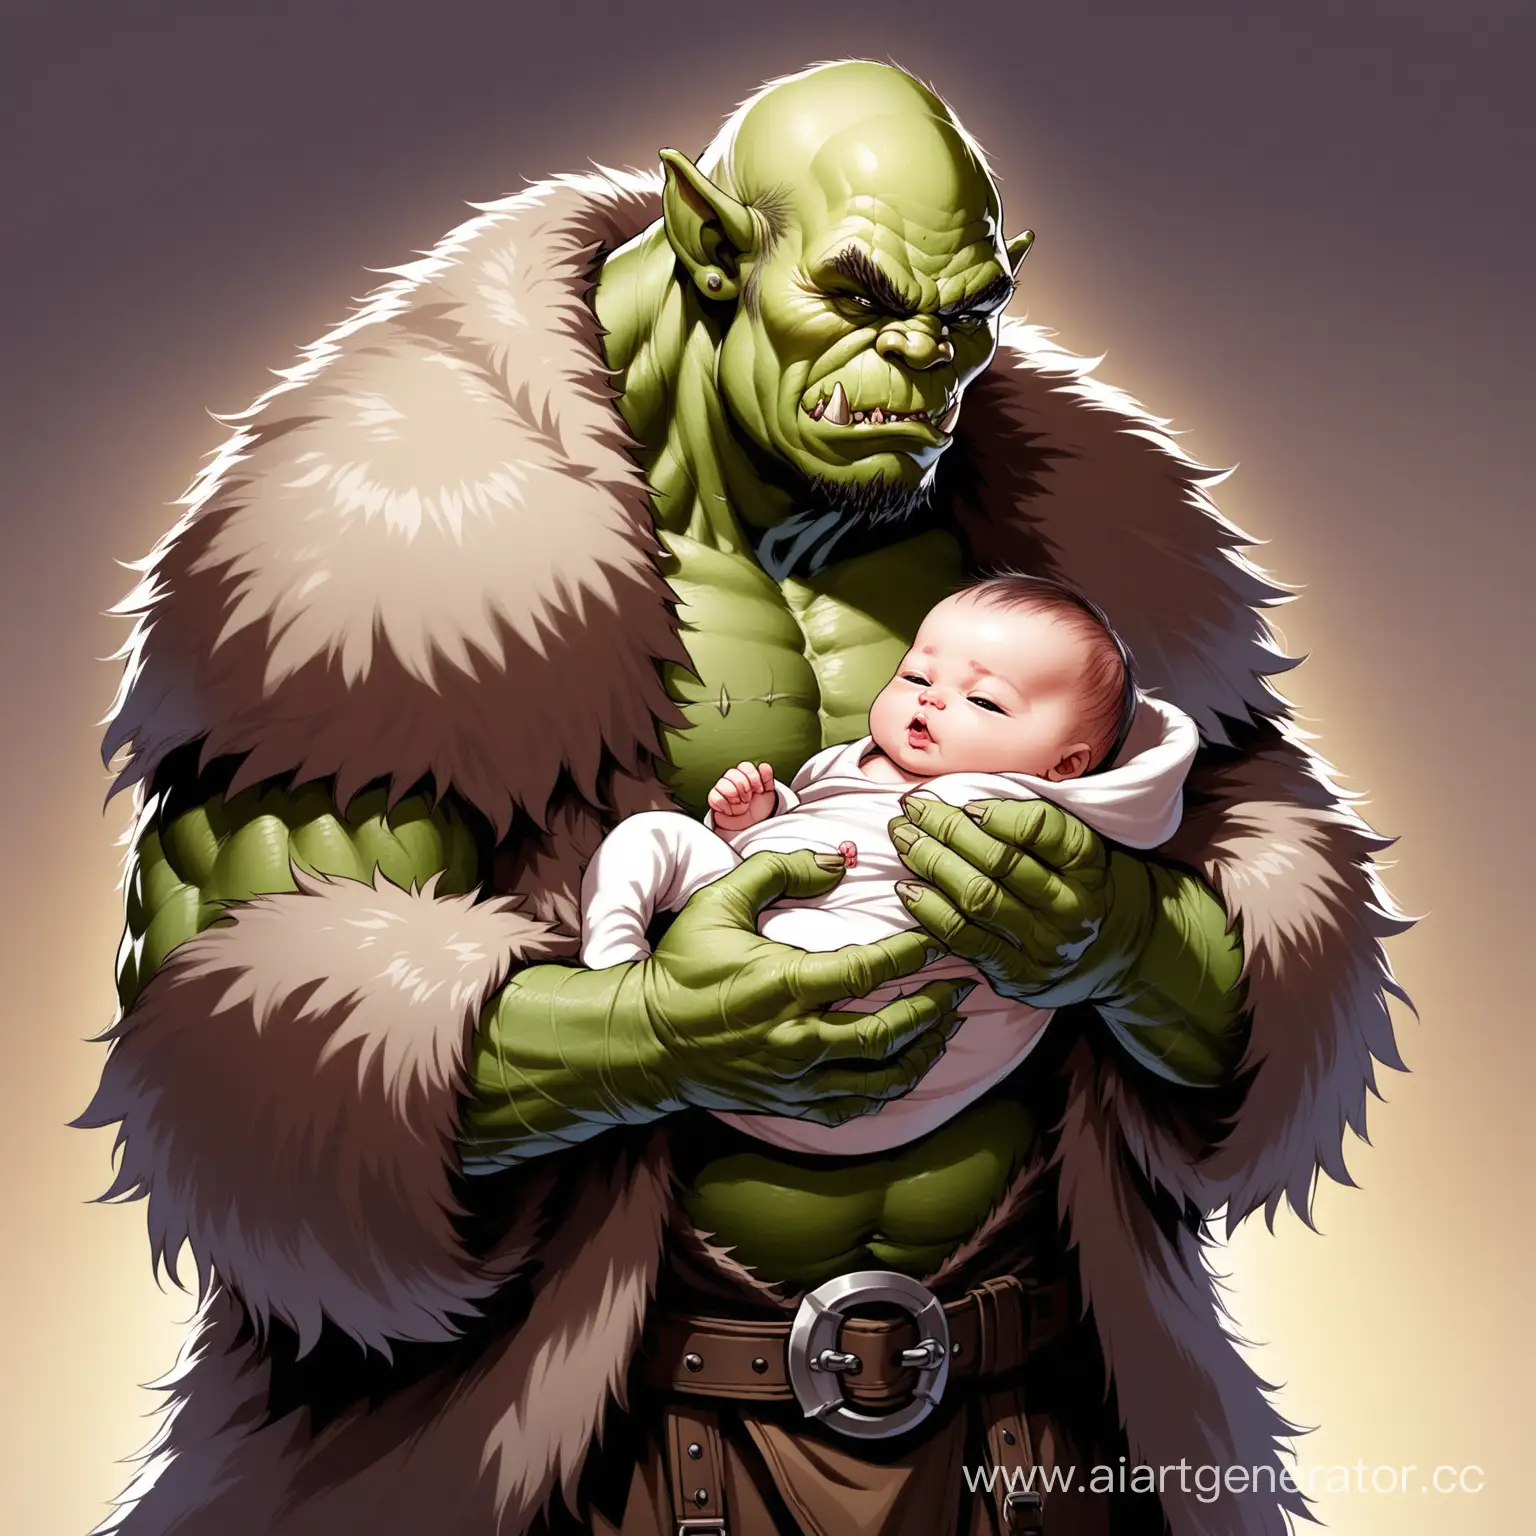 Orcs-Nurturing-with-Tenderness-A-Furry-Embrace